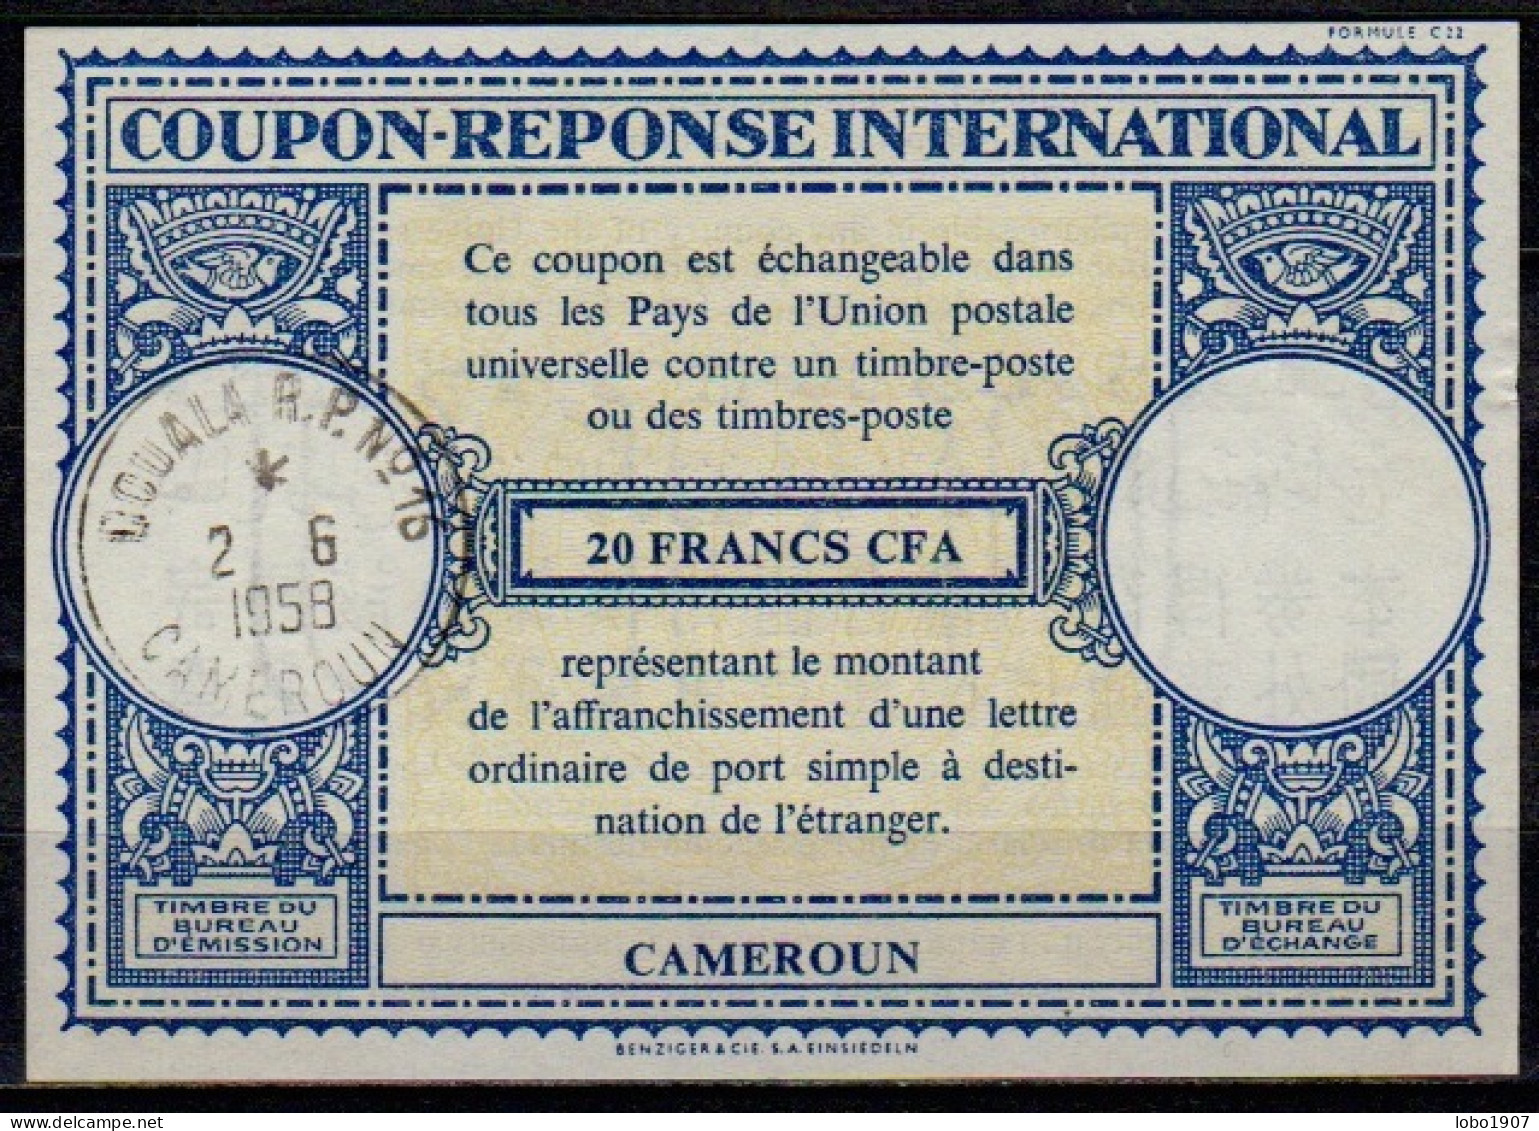 CAMEROUN, CAMEROON  Lo16n  20 FRANCS Int. Reply Coupon Reponse Antwortschein IRC IAS Cupon Respuesta  DOUALA 02.06.58 - Cameroon (1960-...)